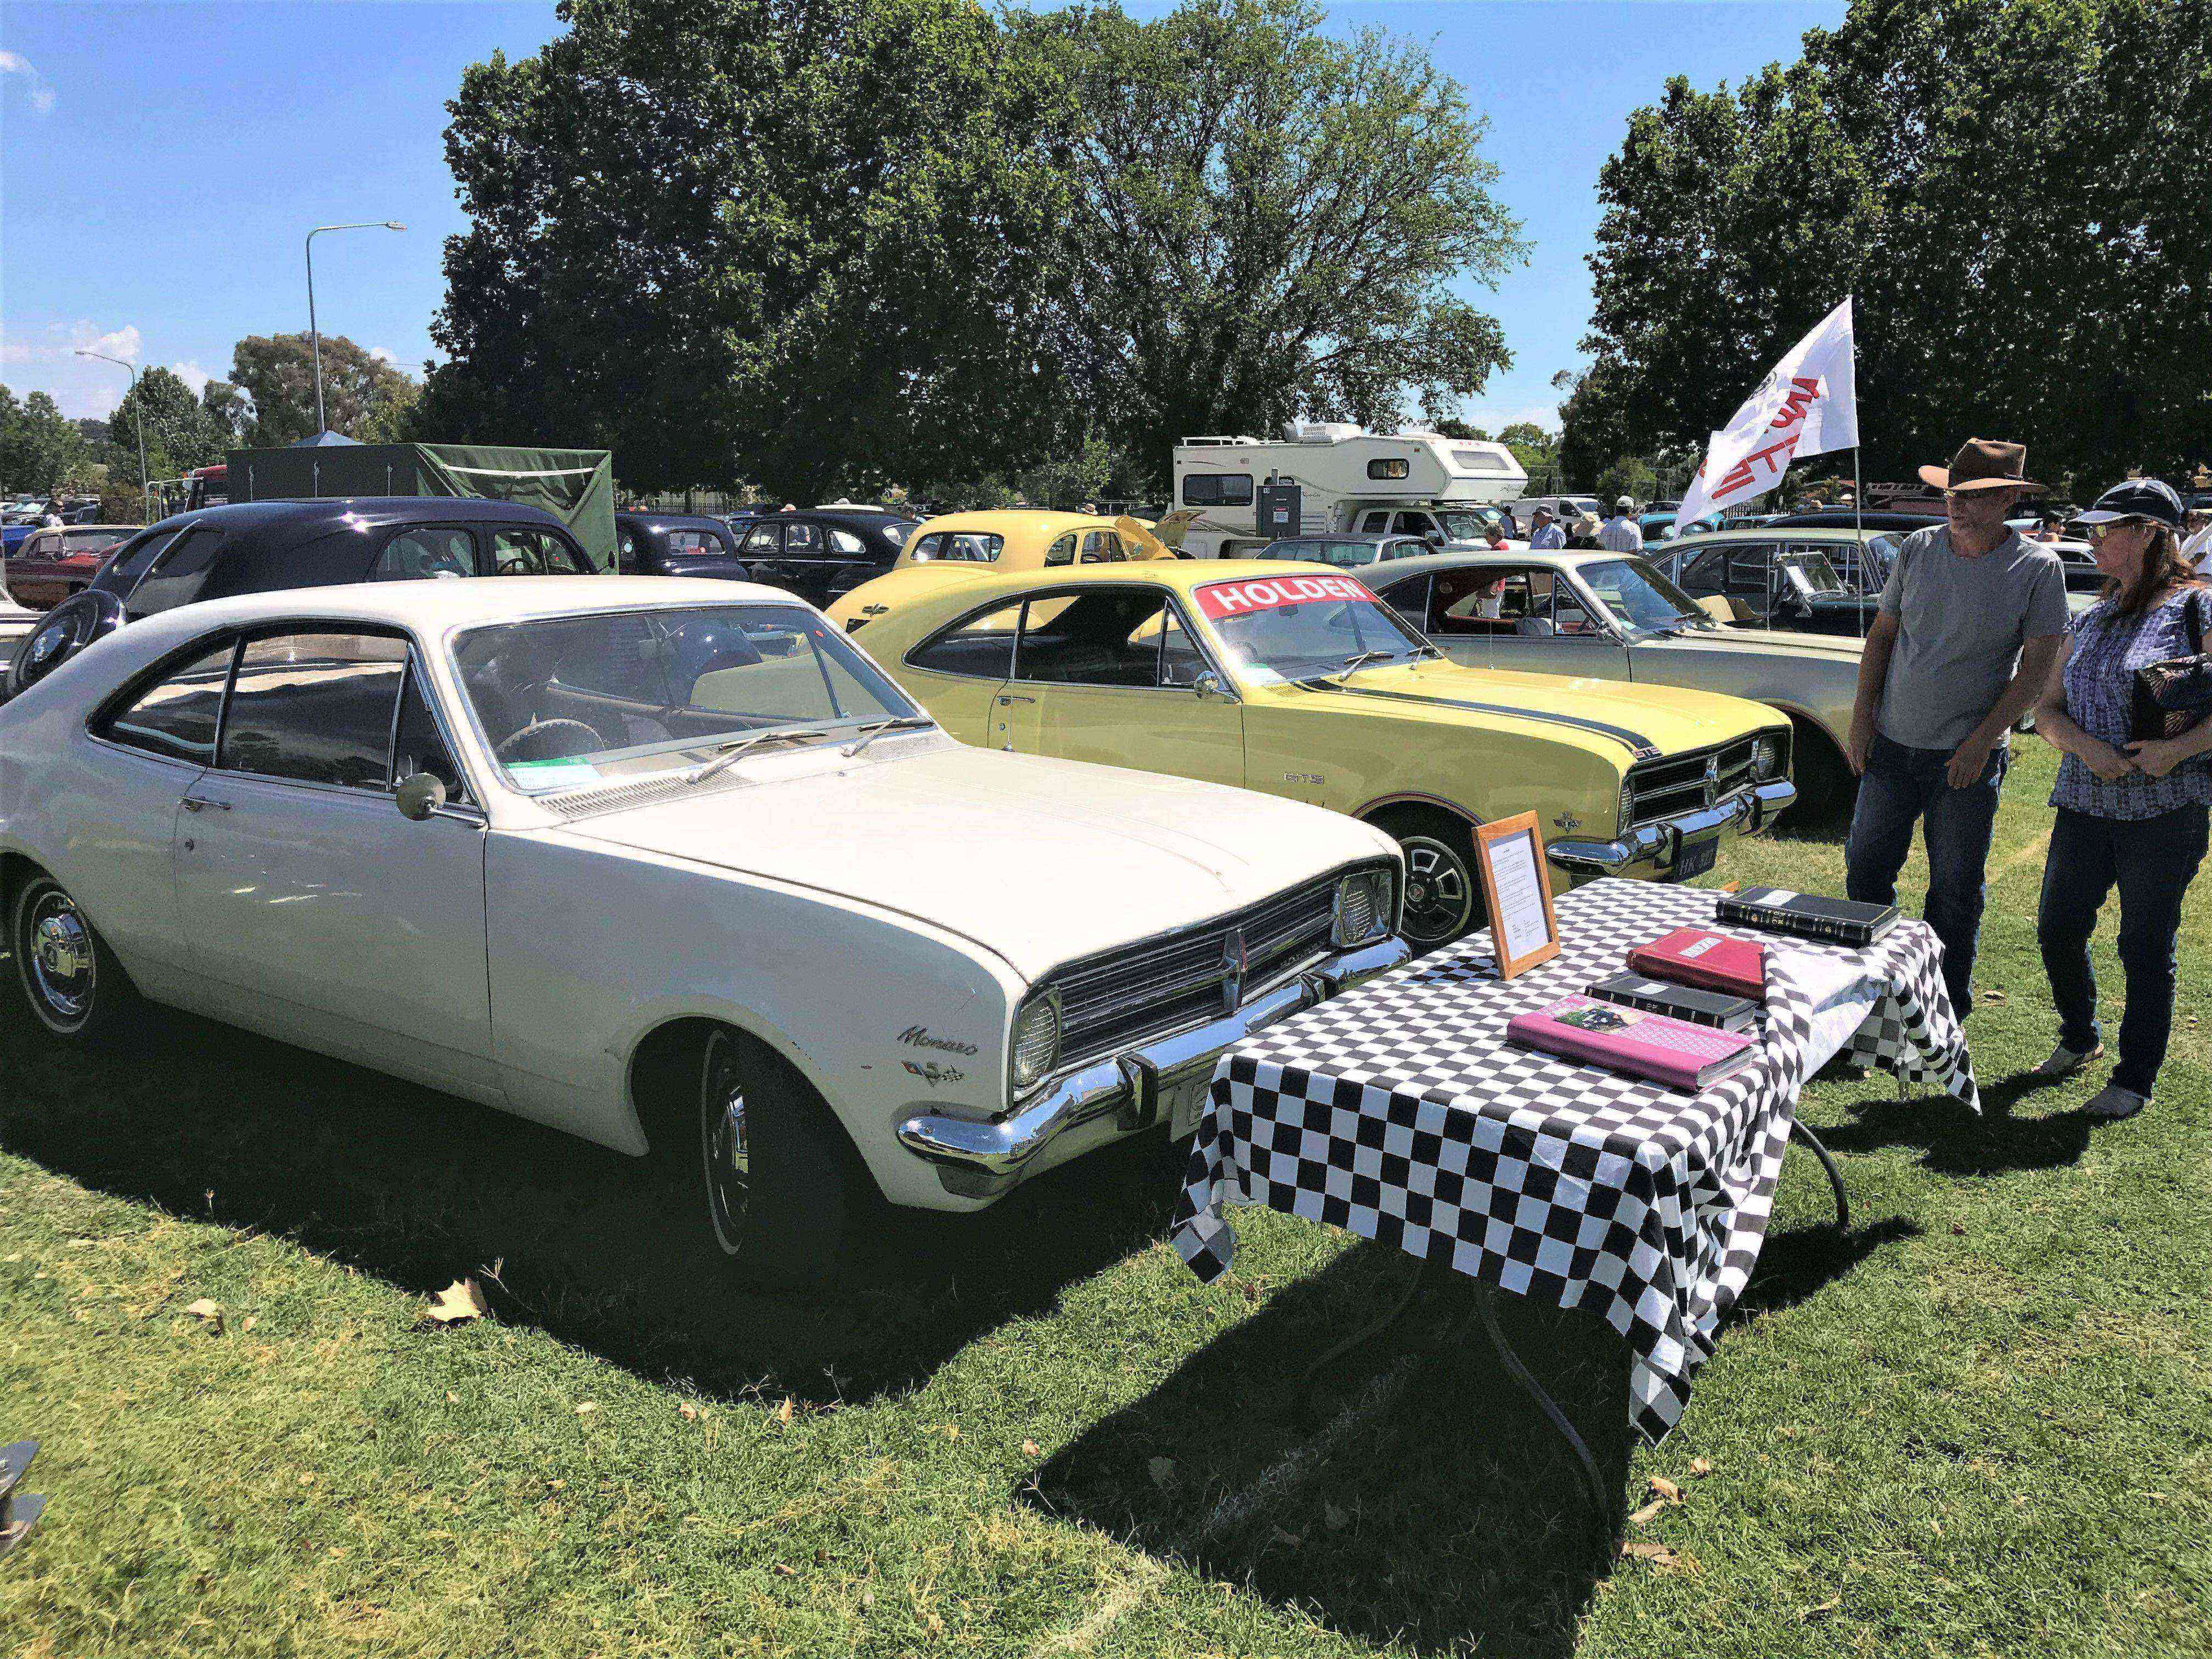 Car enthusiasts in for a wheely good time at Queanbeyan Showground this Sunday